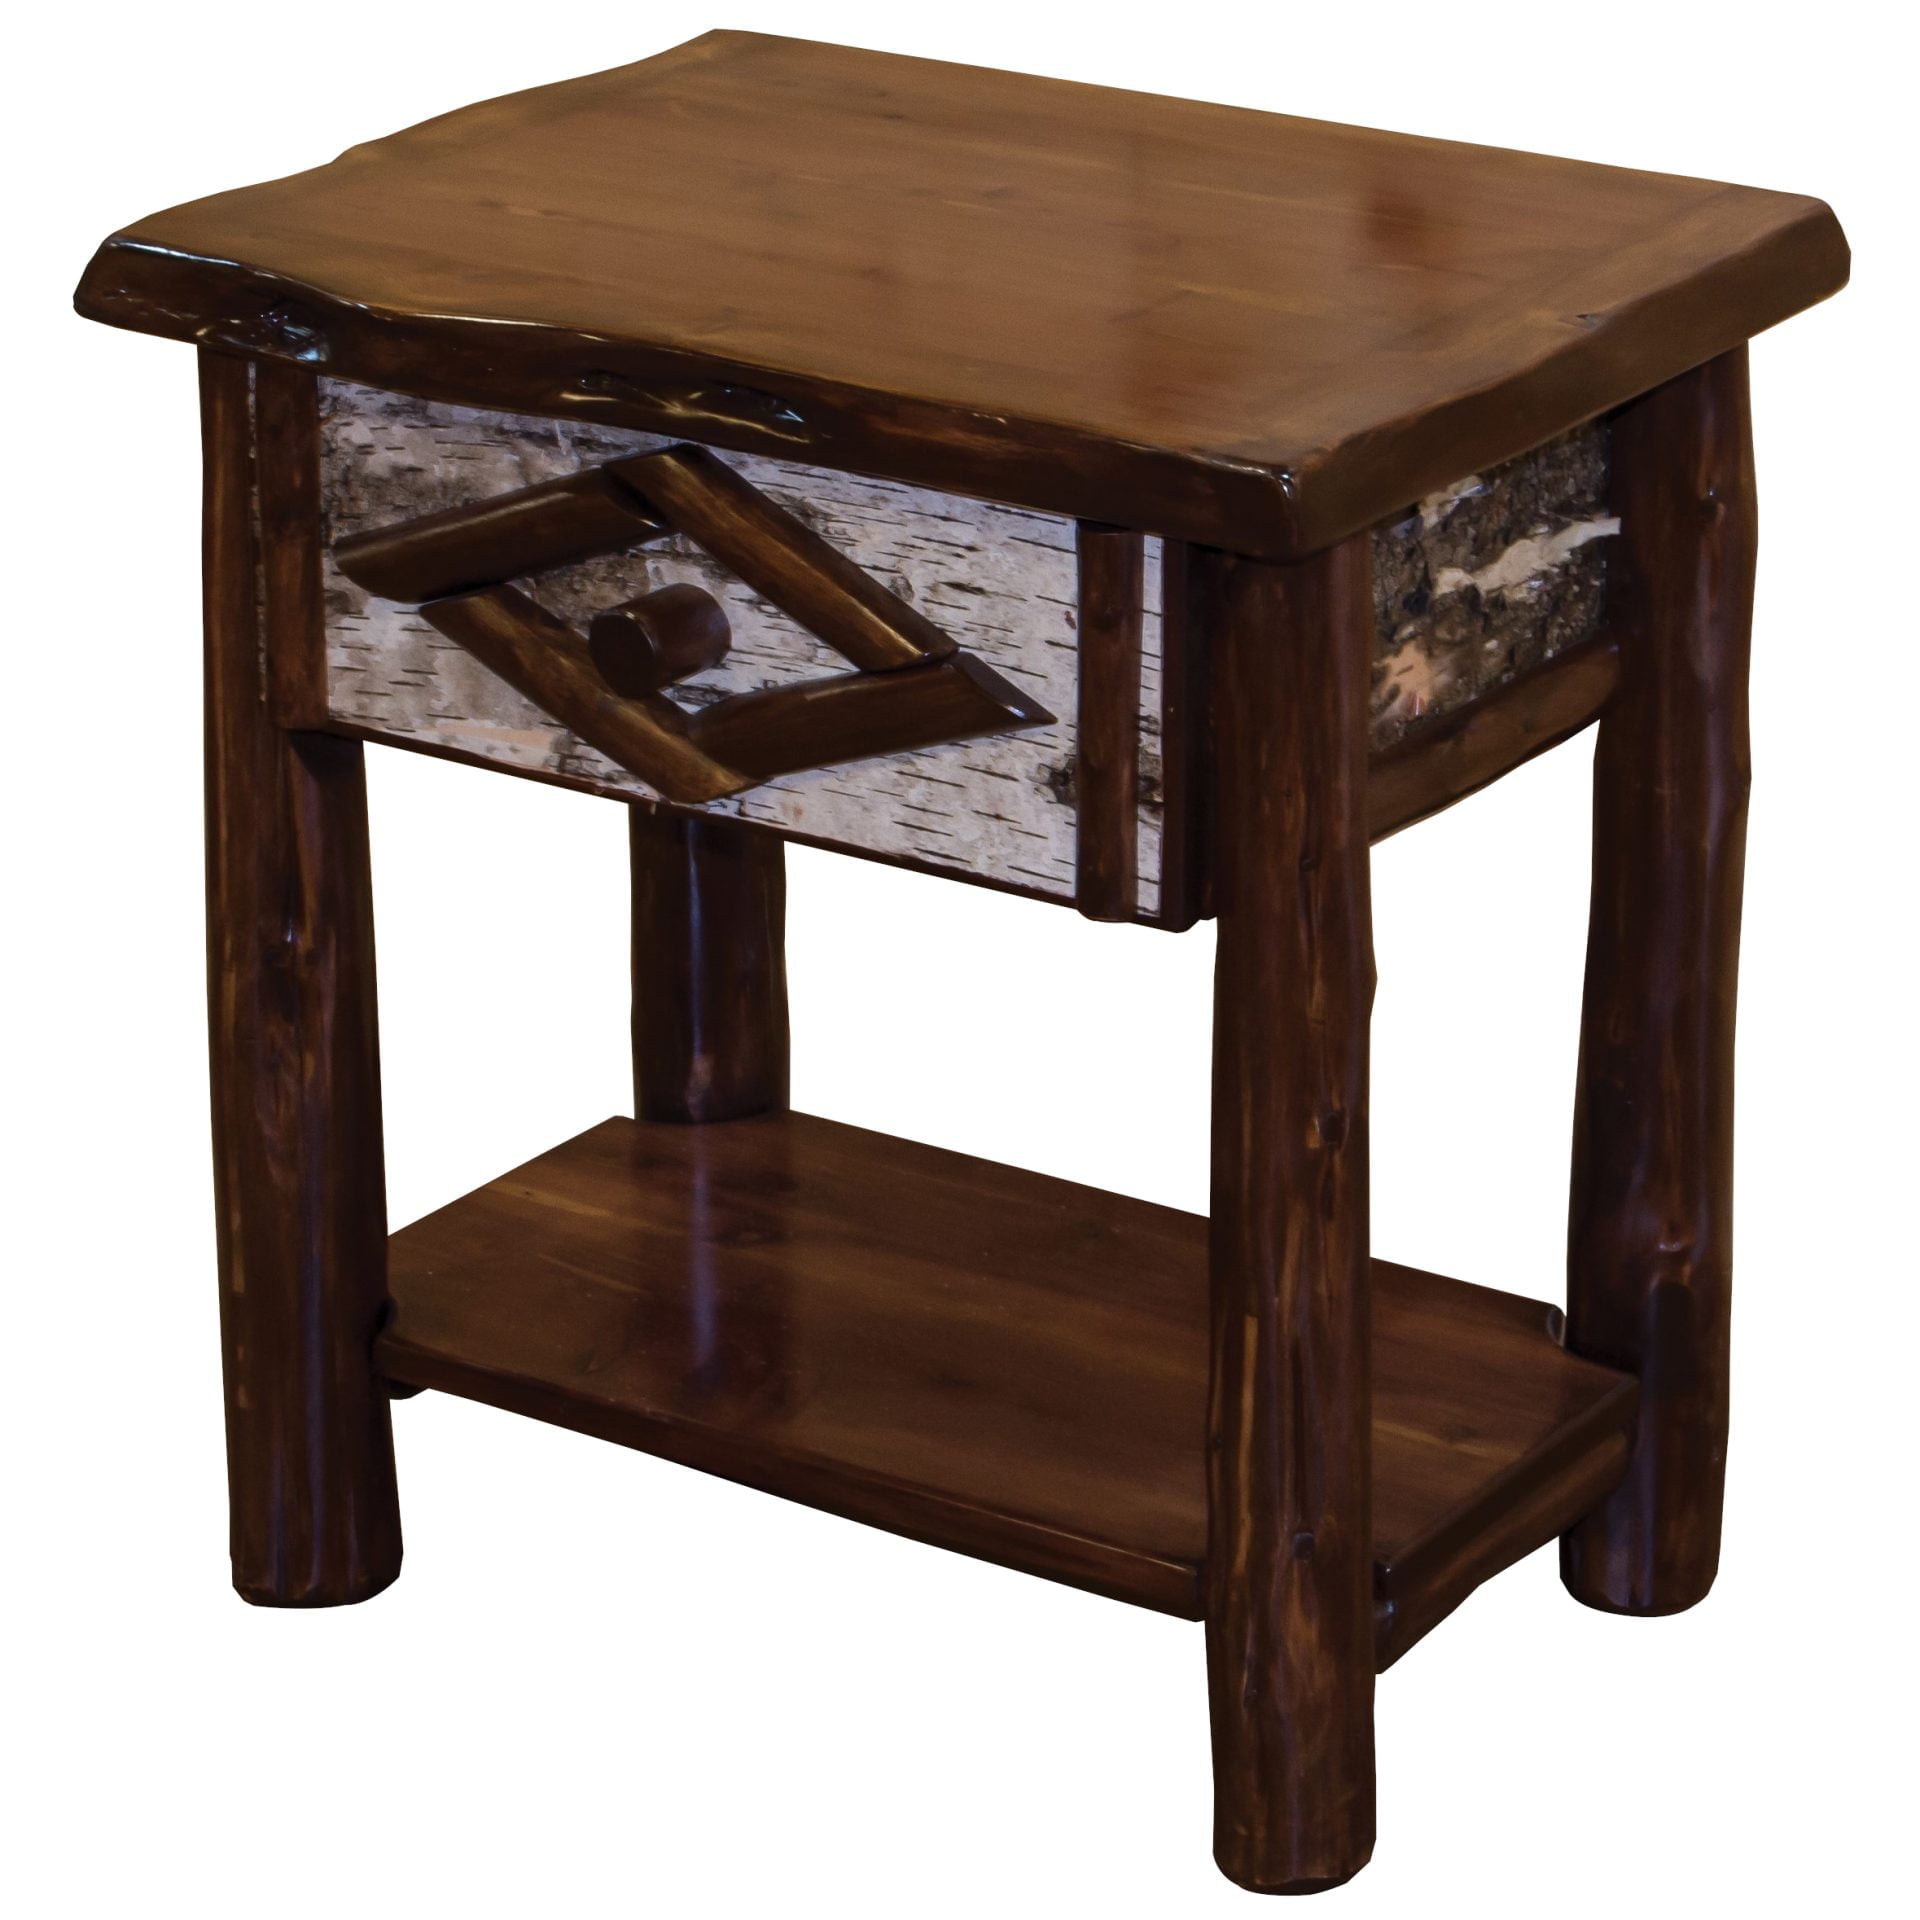 Rustic Red Cedar Log Adirondack Collection 1-Drawer End Table